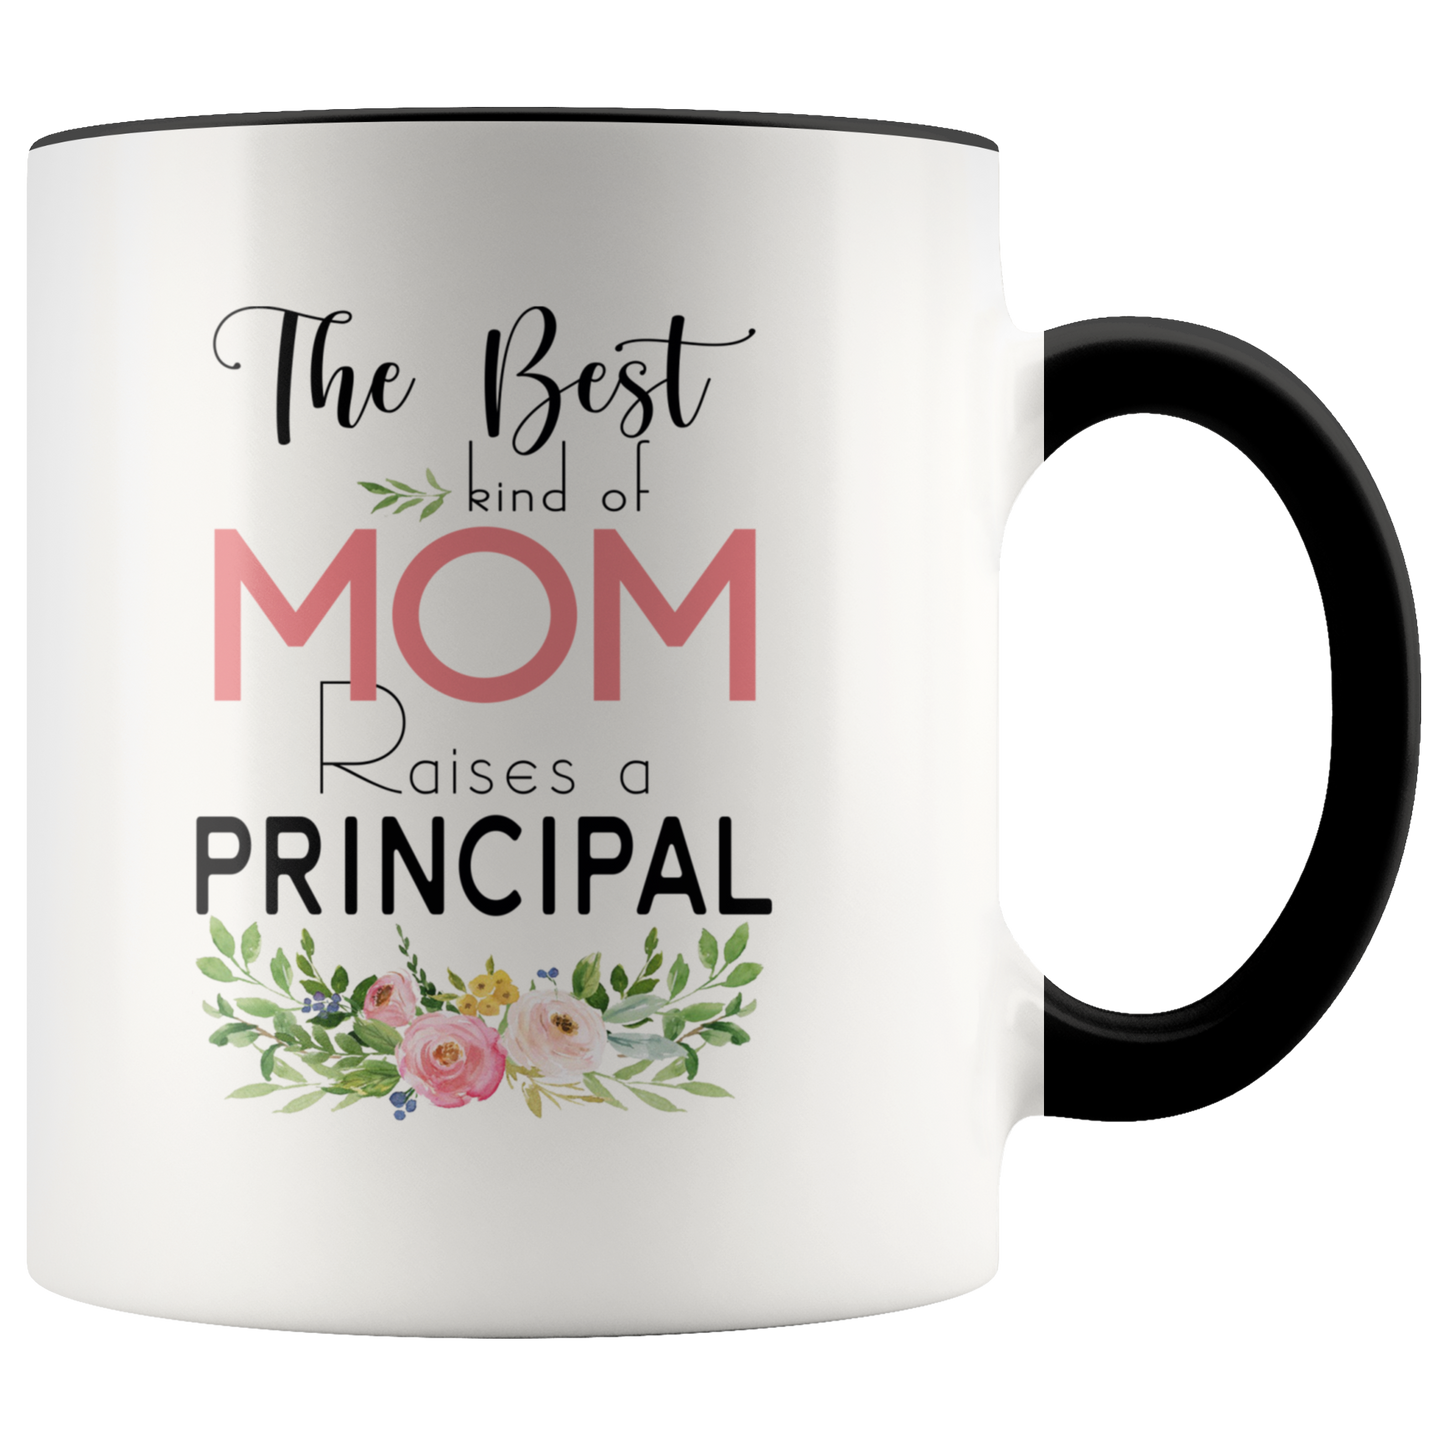 M-21384786-sp-23686 - [ Principal | 1 | 1 ]Mothers Day Mugs Job Funny - The Best Kind Of Mom Raises A P